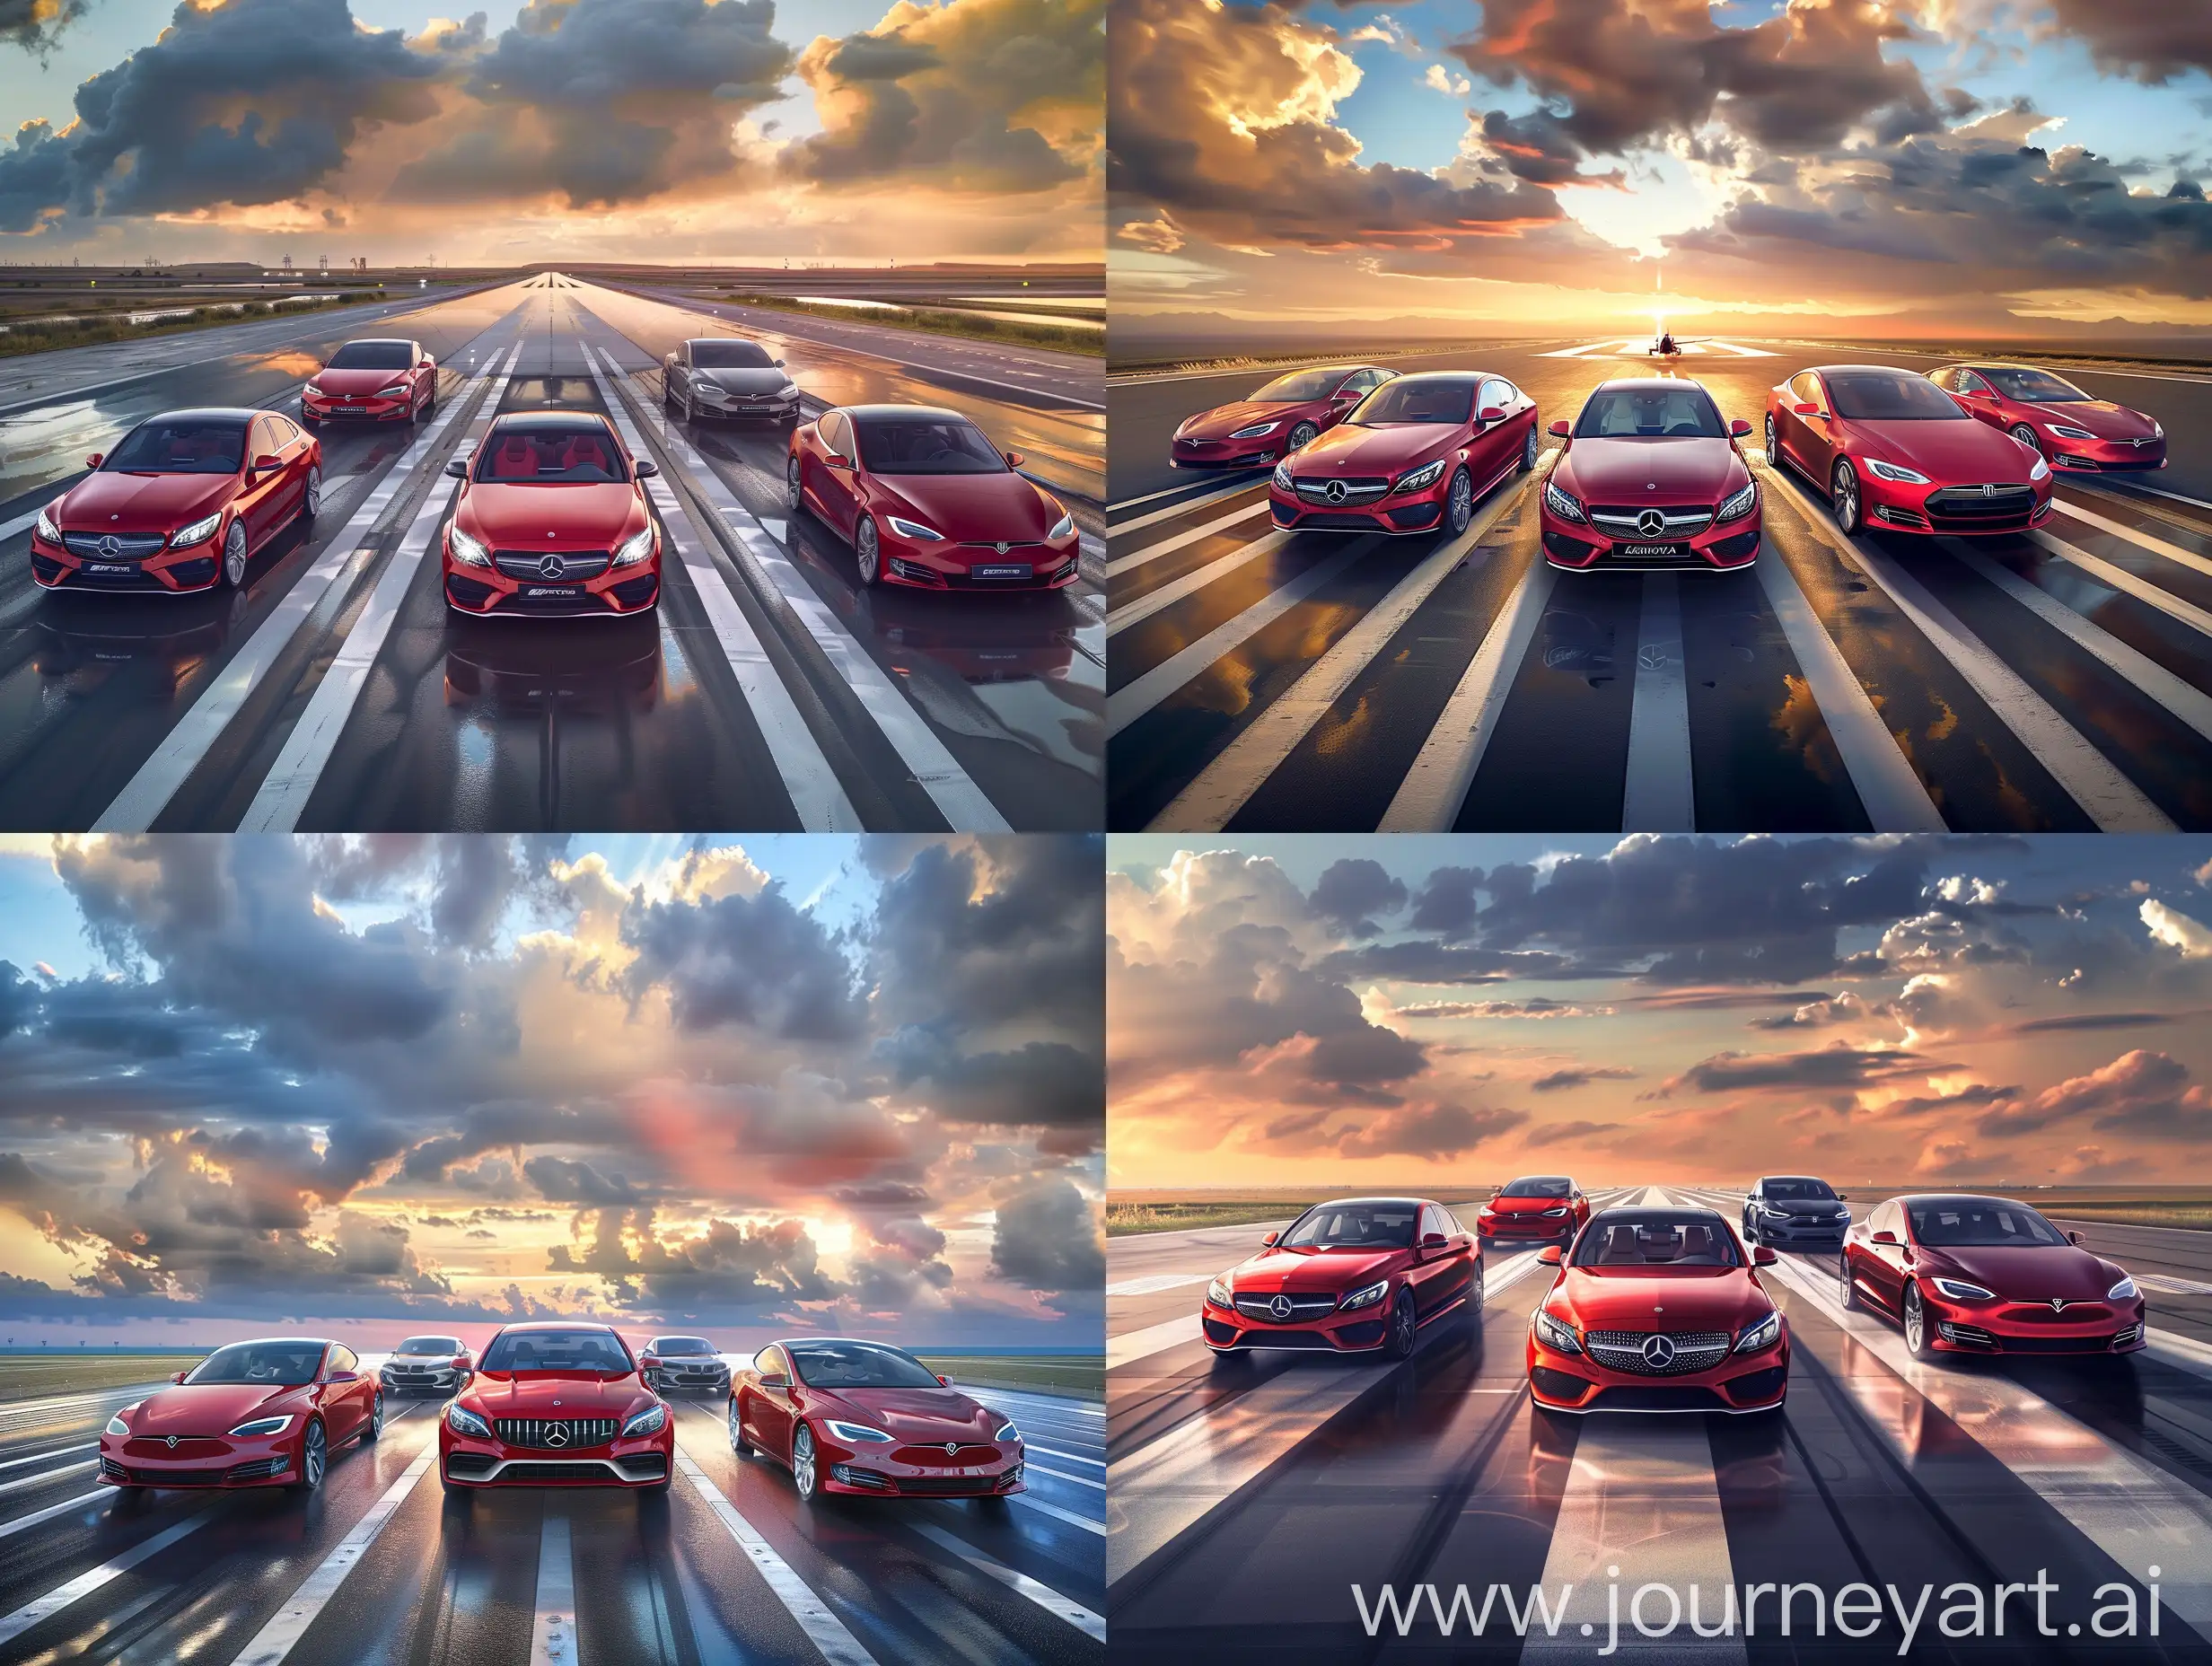 Luxurious-Car-Lineup-Red-Mercedes-CClass-Toyota-Camry-Tesla-BMW-and-Honda-on-Dramatic-Sky-Runway